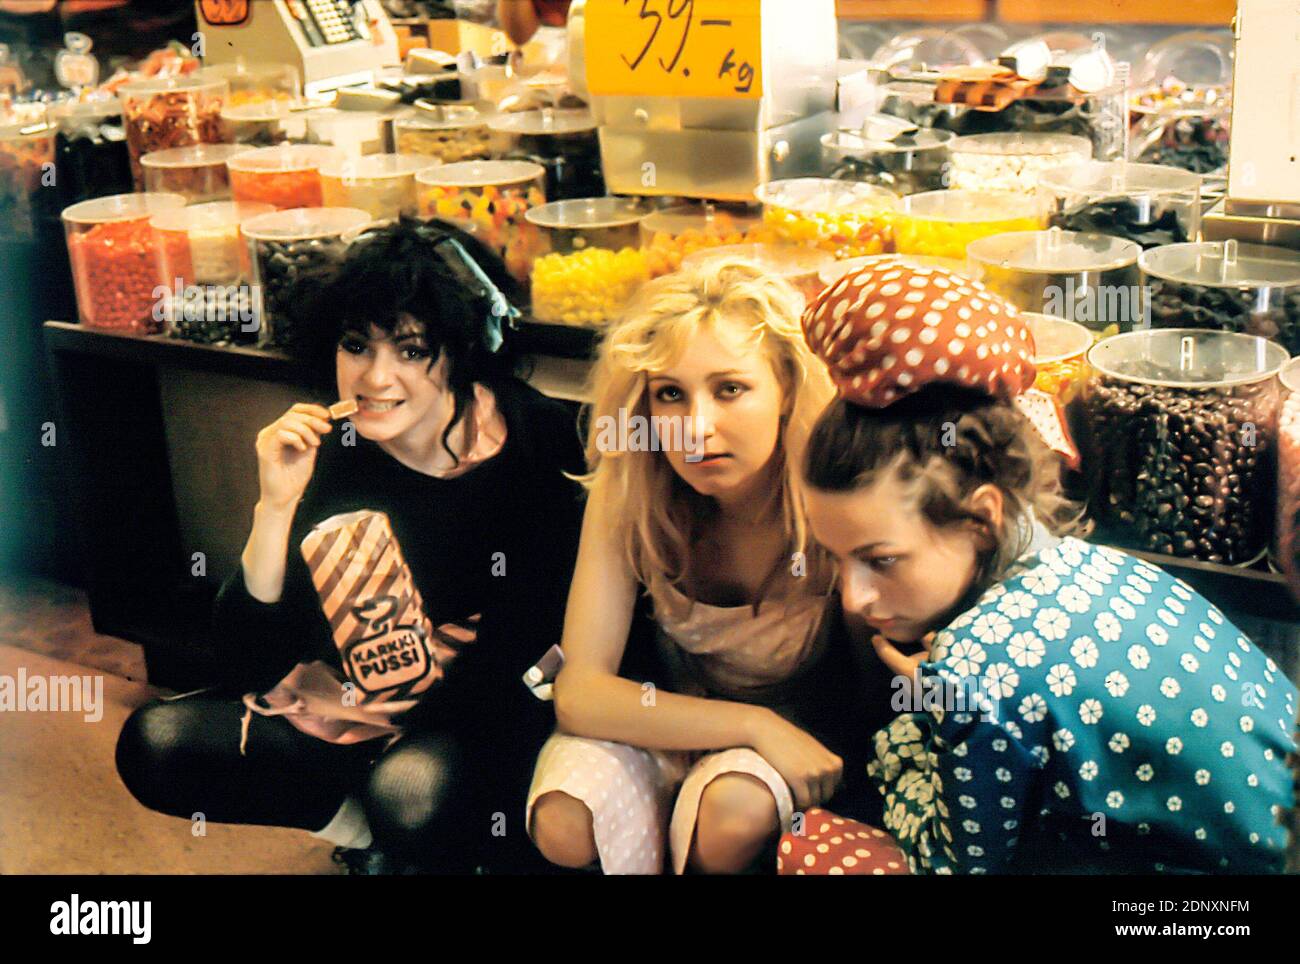 THE SLITS 1980 (Finland) in a sweetshop. Tessa Pollitt, Ari-up and Viv Albertine after releasing 'In the Beginning there was rhythm' on Y records. Stock Photo